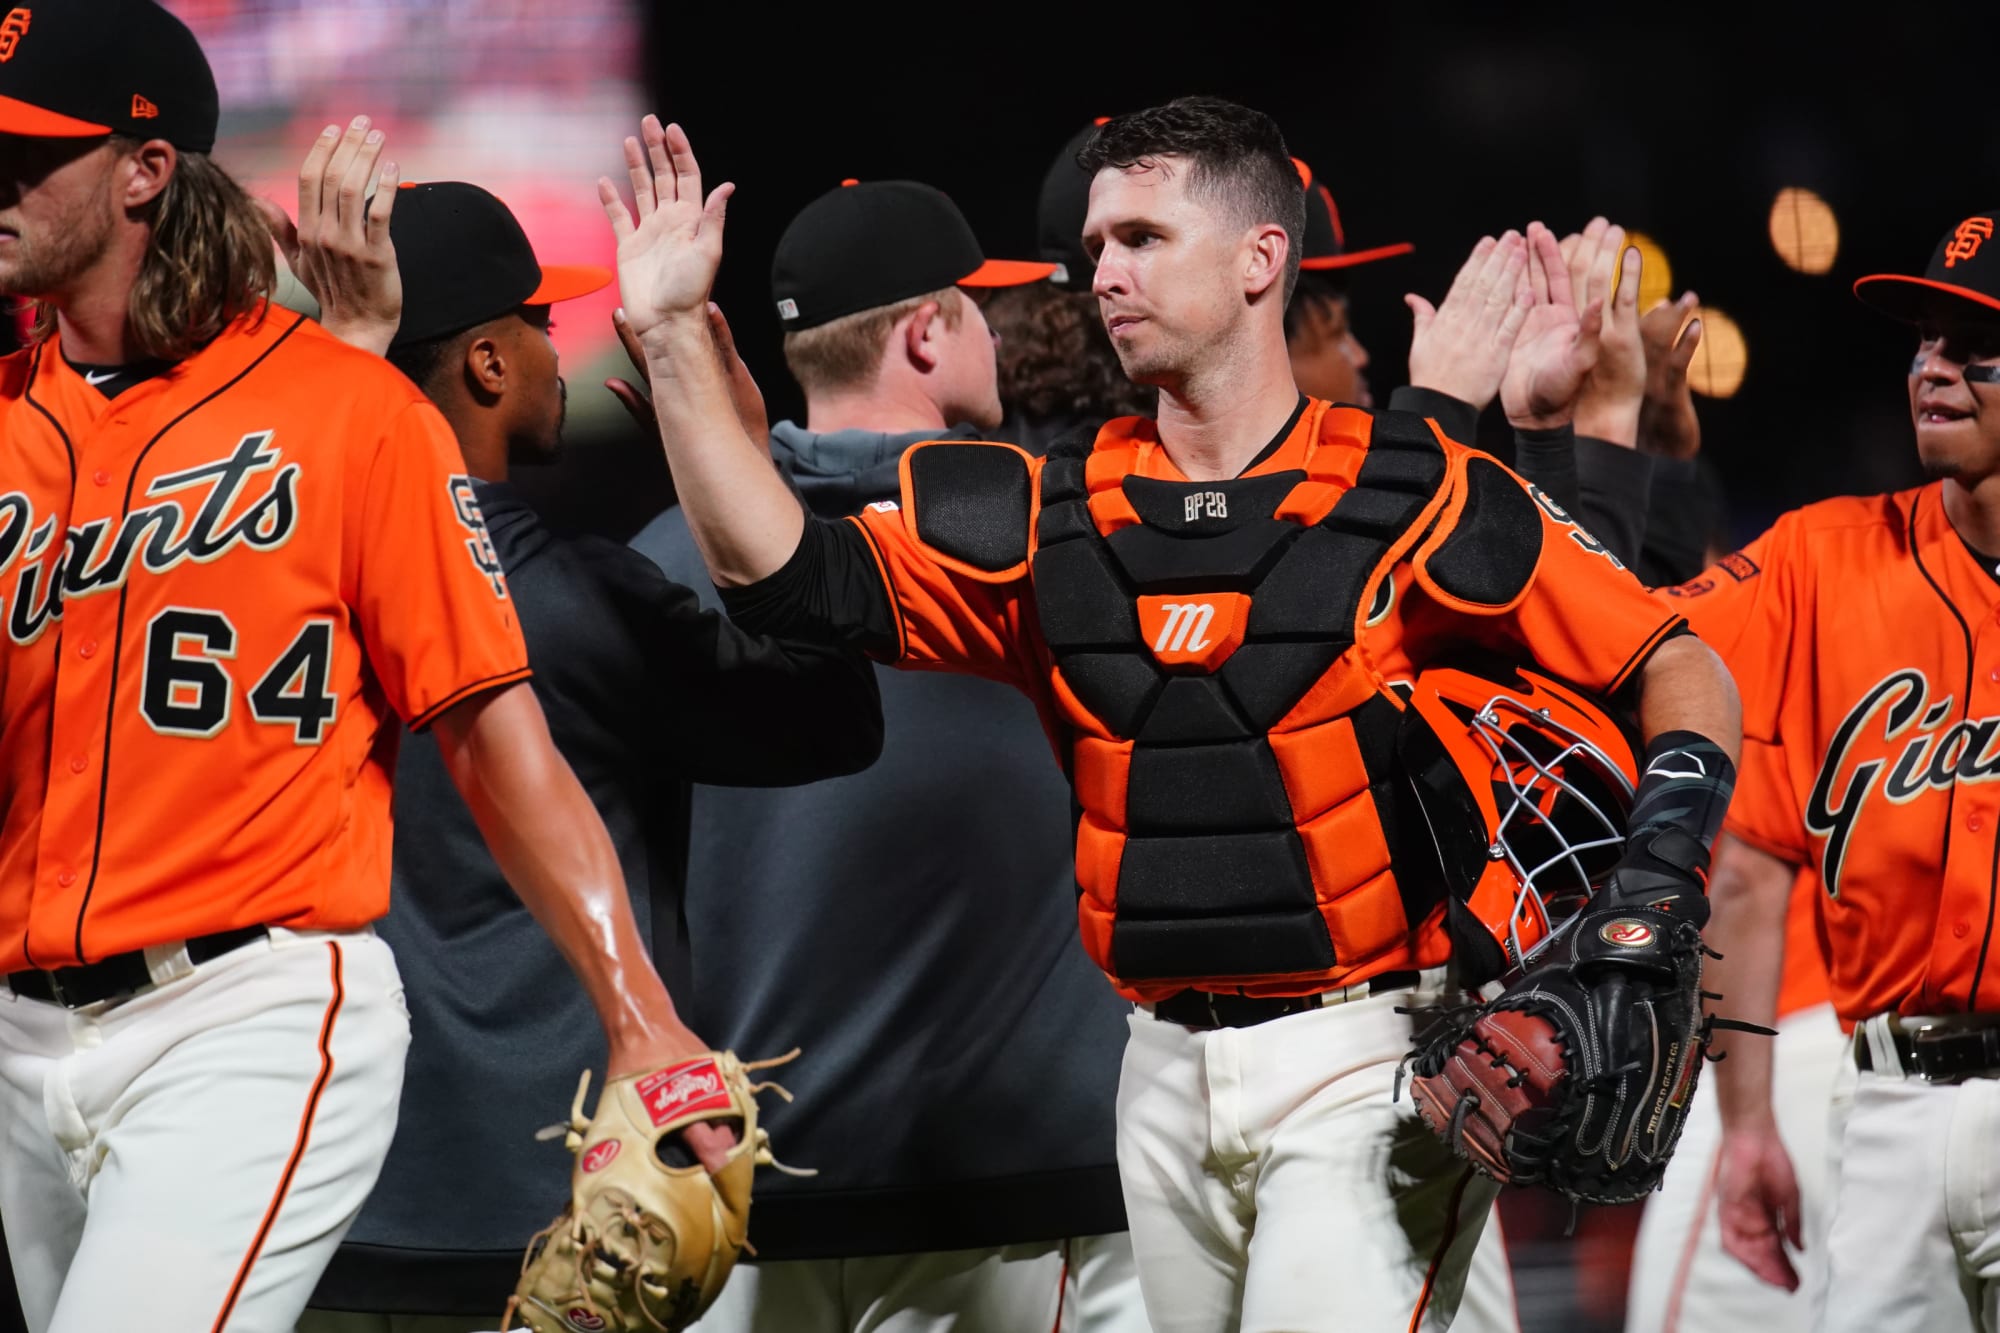 Giants' Joey Bart endures growing pains, but Buster Posey could relate